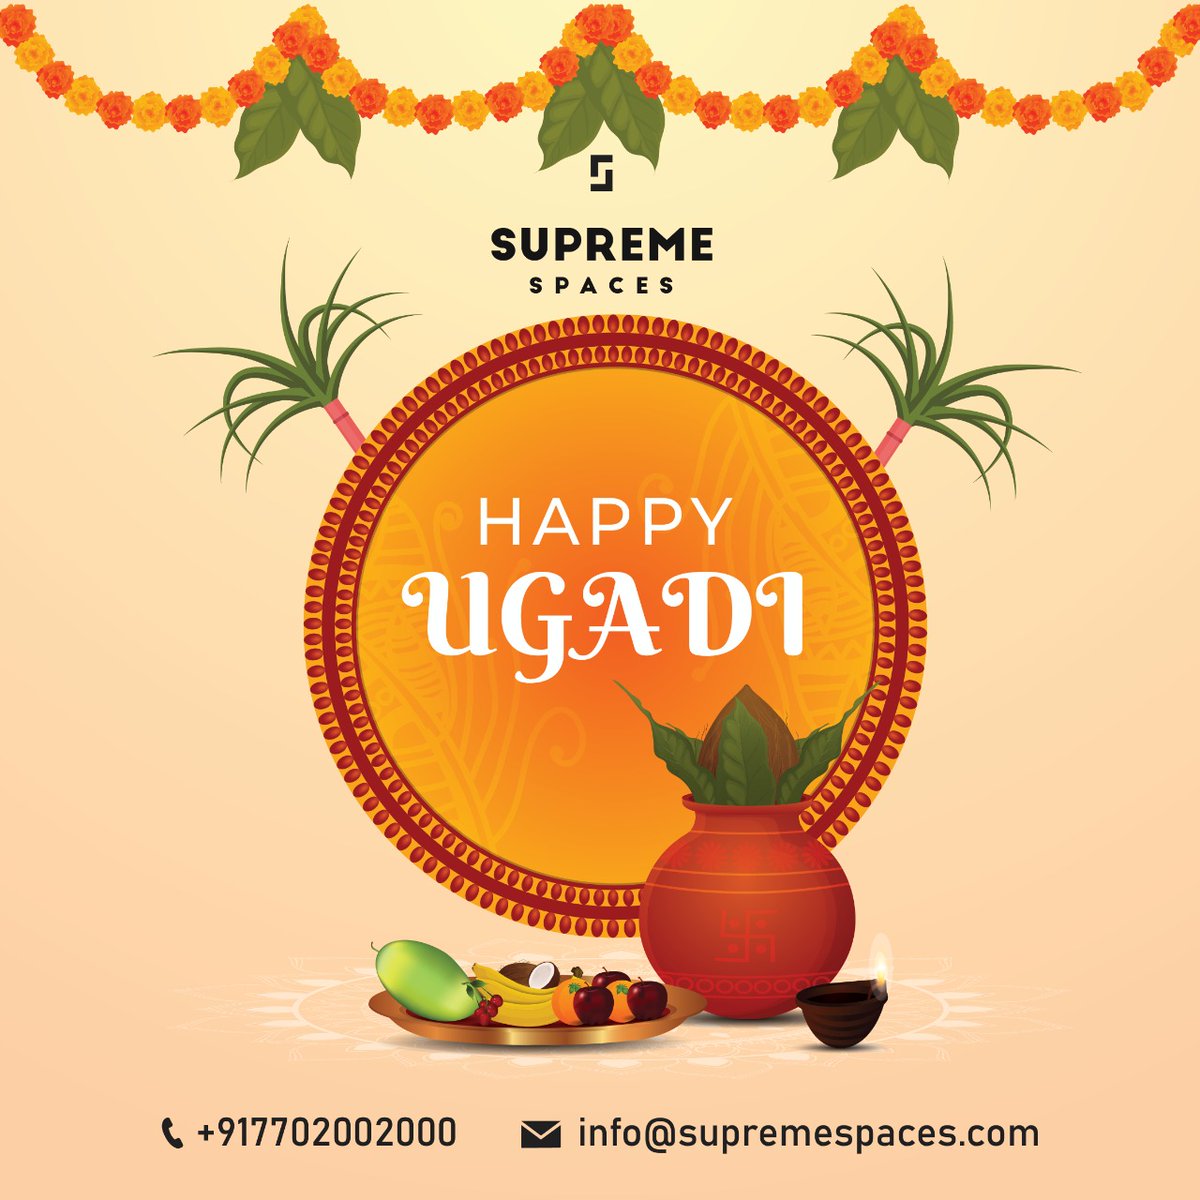 HAPPY UGADI !!

BEST WISHES TO YOU AND YOUR FAMILY THIS UGADI!
MAY YOU HAVE A NEW YEAR FILLED WIH LAUGHTER, JOY AND FULFILMENT.

#ugadi #ugadispecial #wishing #happyugadi #ugadi2020 #instaugadi #ugadiphotos #coworkinglife #cowork #coworkingcommunity #community #supremespaces